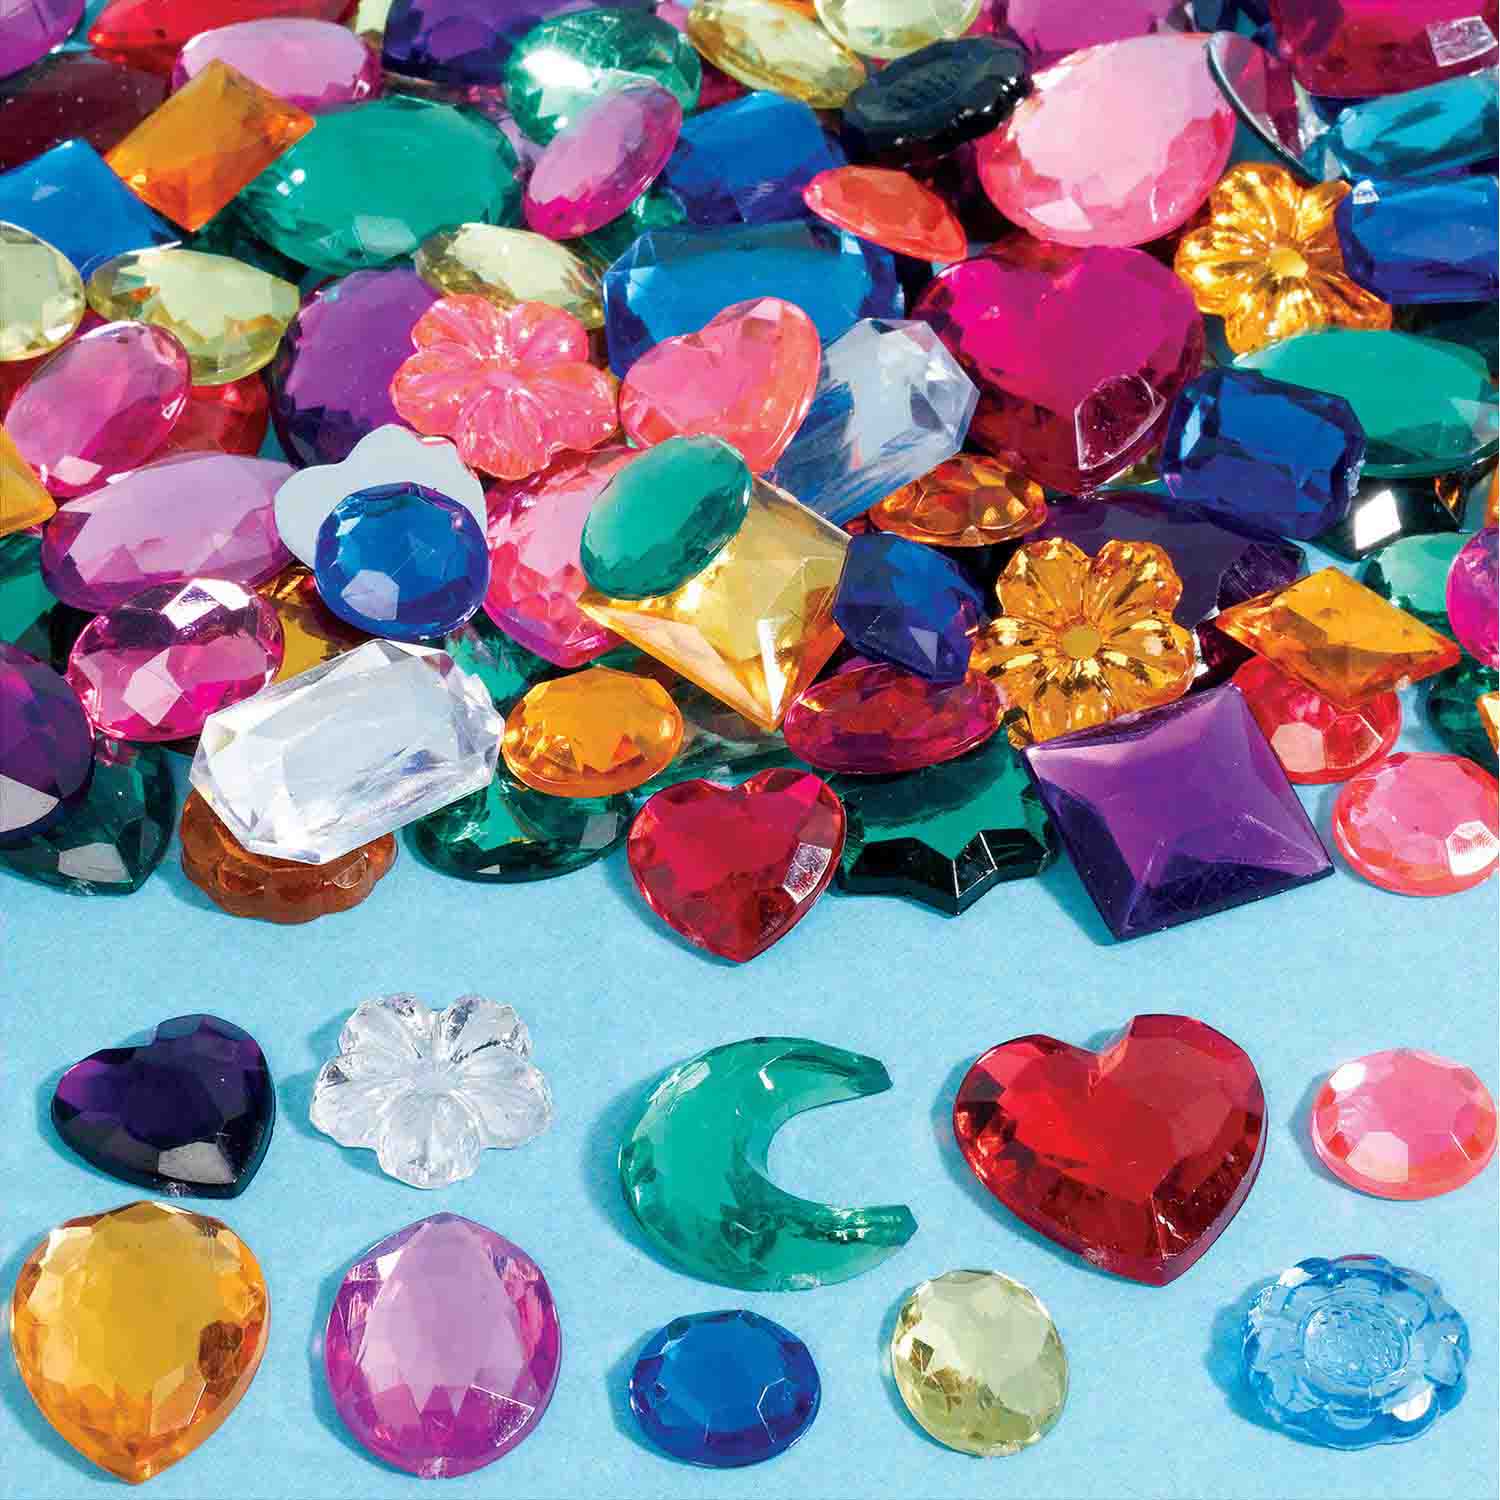 Acrylic Gemstones Classroom Pack, 1 lb, Assorted Colors-sizes